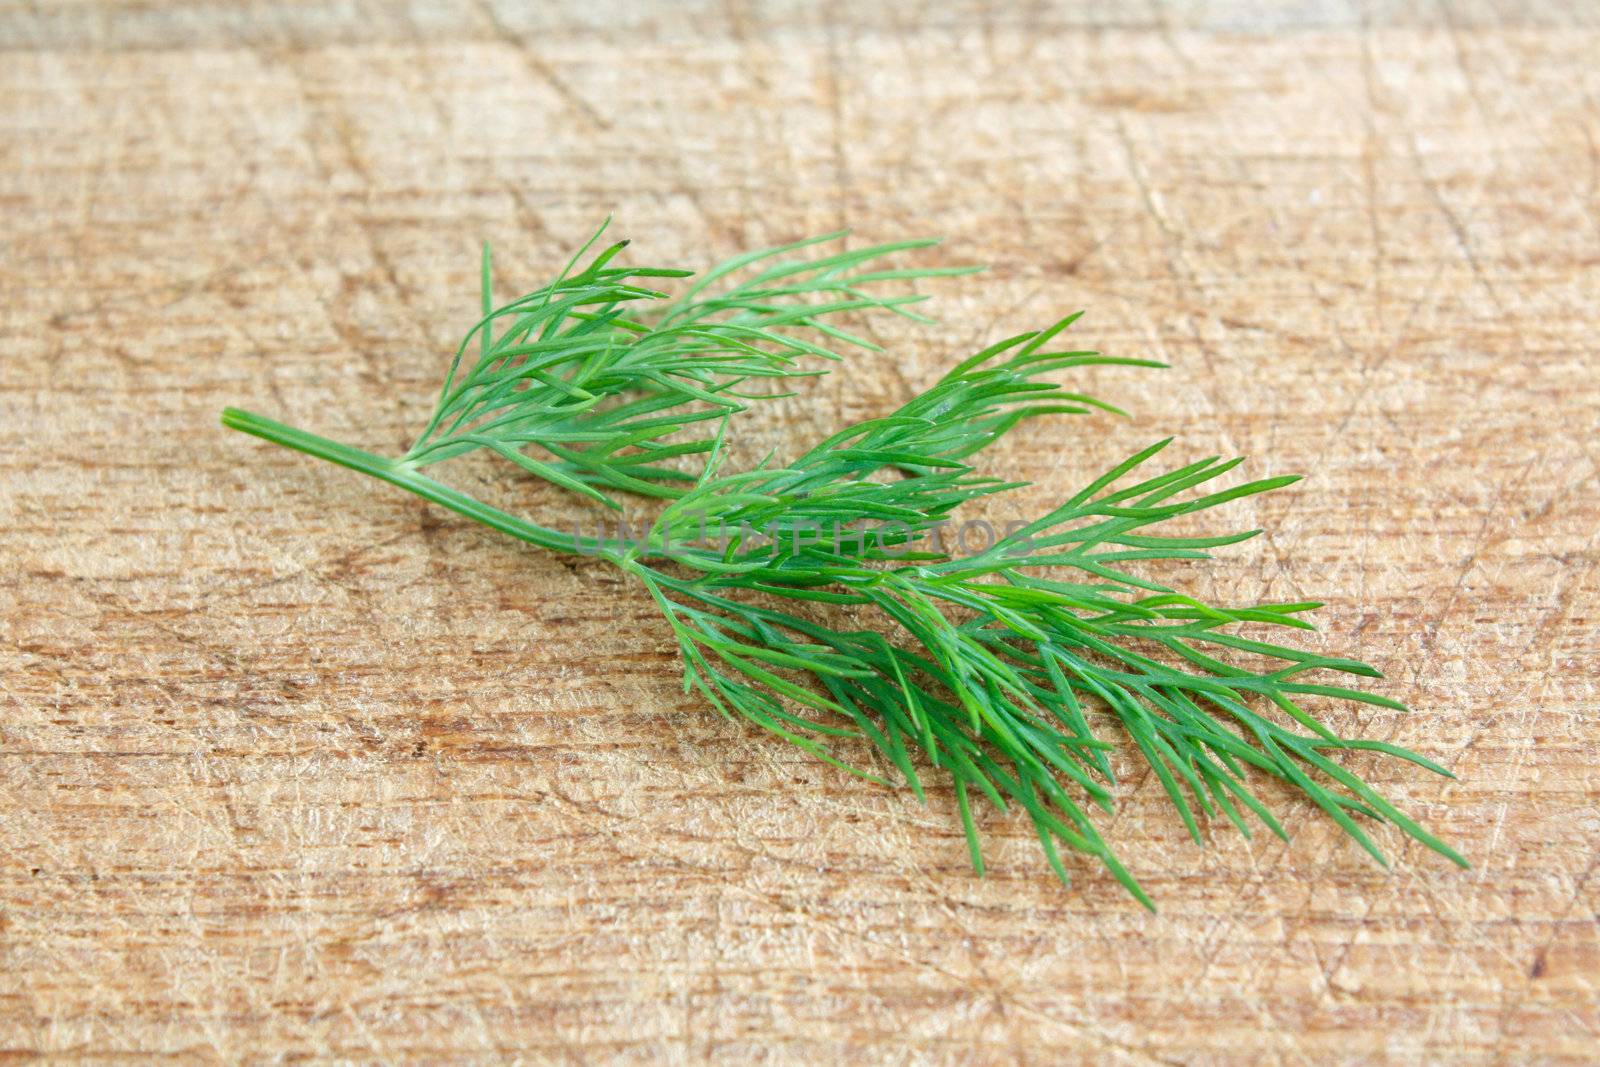 Delicious fresh dill from the garden